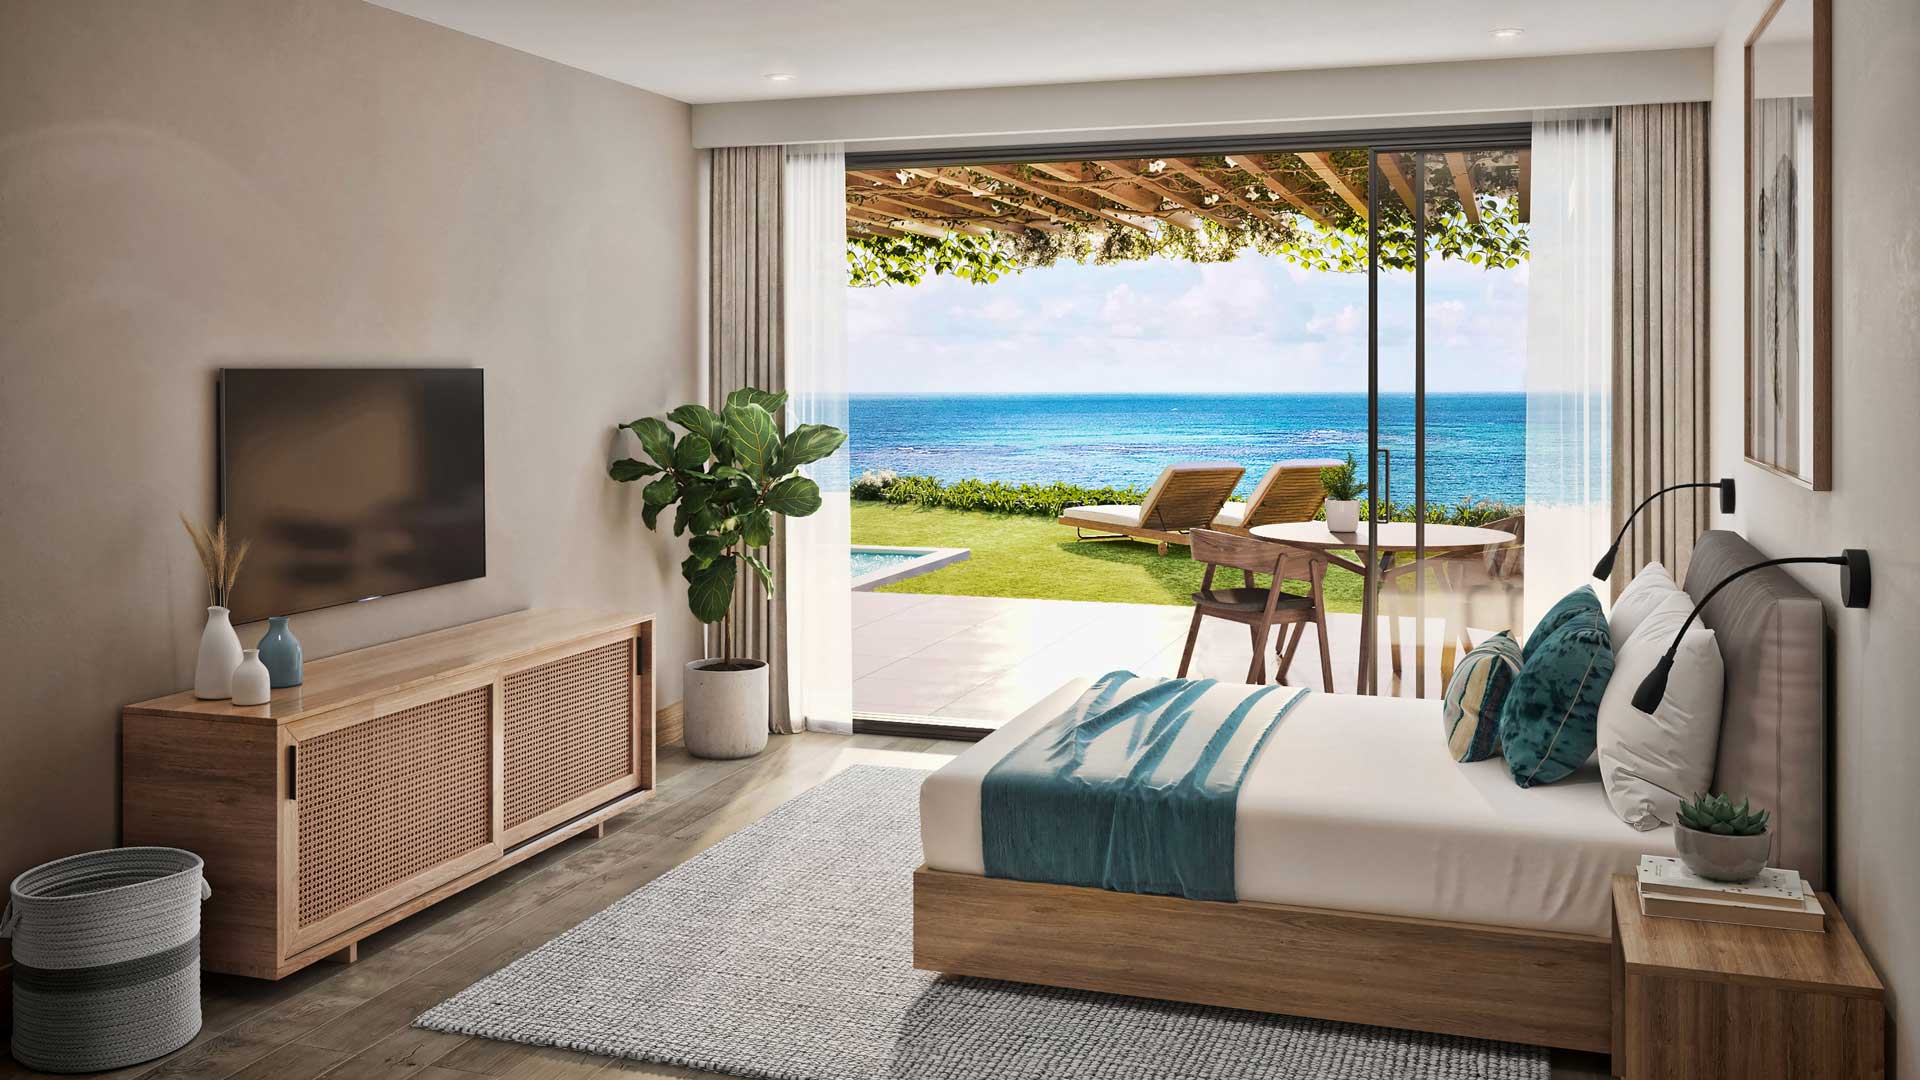 Buying a waterfront apartment in Mauritius Invest in Mauritius Buy an apartment in Mauritius westimmo luxury real estate mauritius